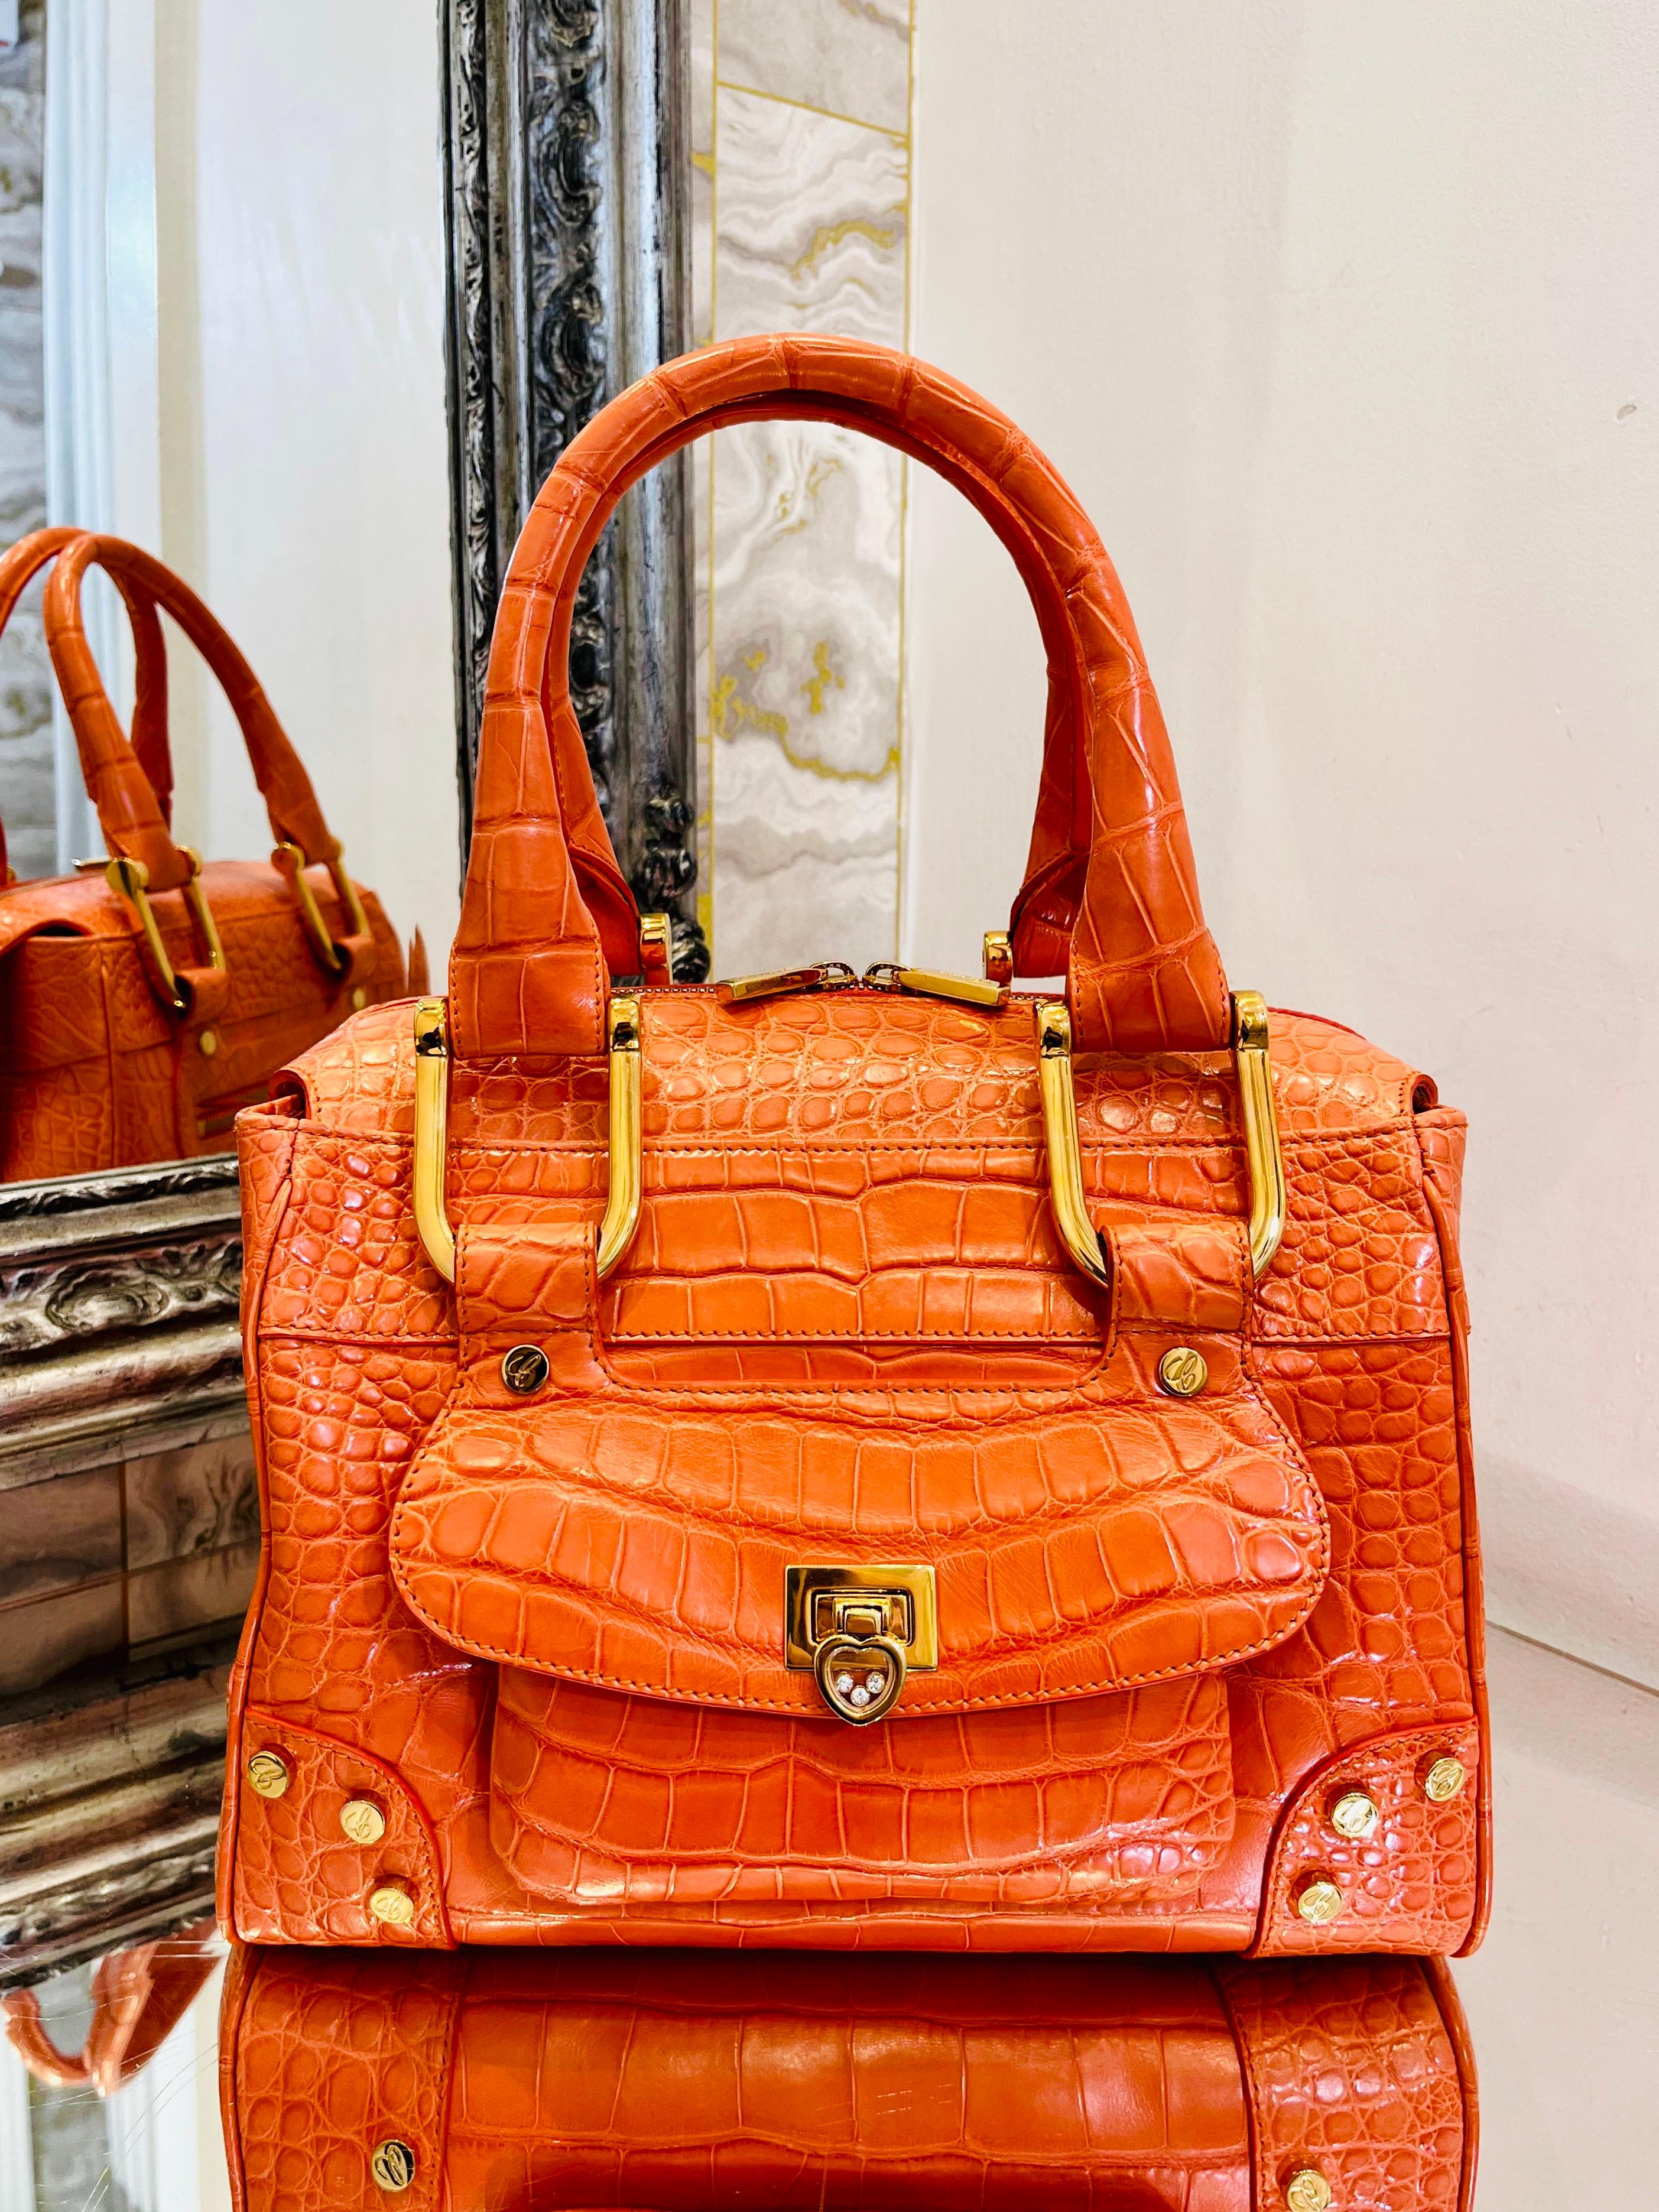 Rare Item - Chopard Crocodile Skin Carolina Bag

Ltd edition - Orange exotic skin bag with top carry/should handles and gold hardware.

Love heart closure with floating crystals to the front feature pocket.

Zipper closure to the bags  main